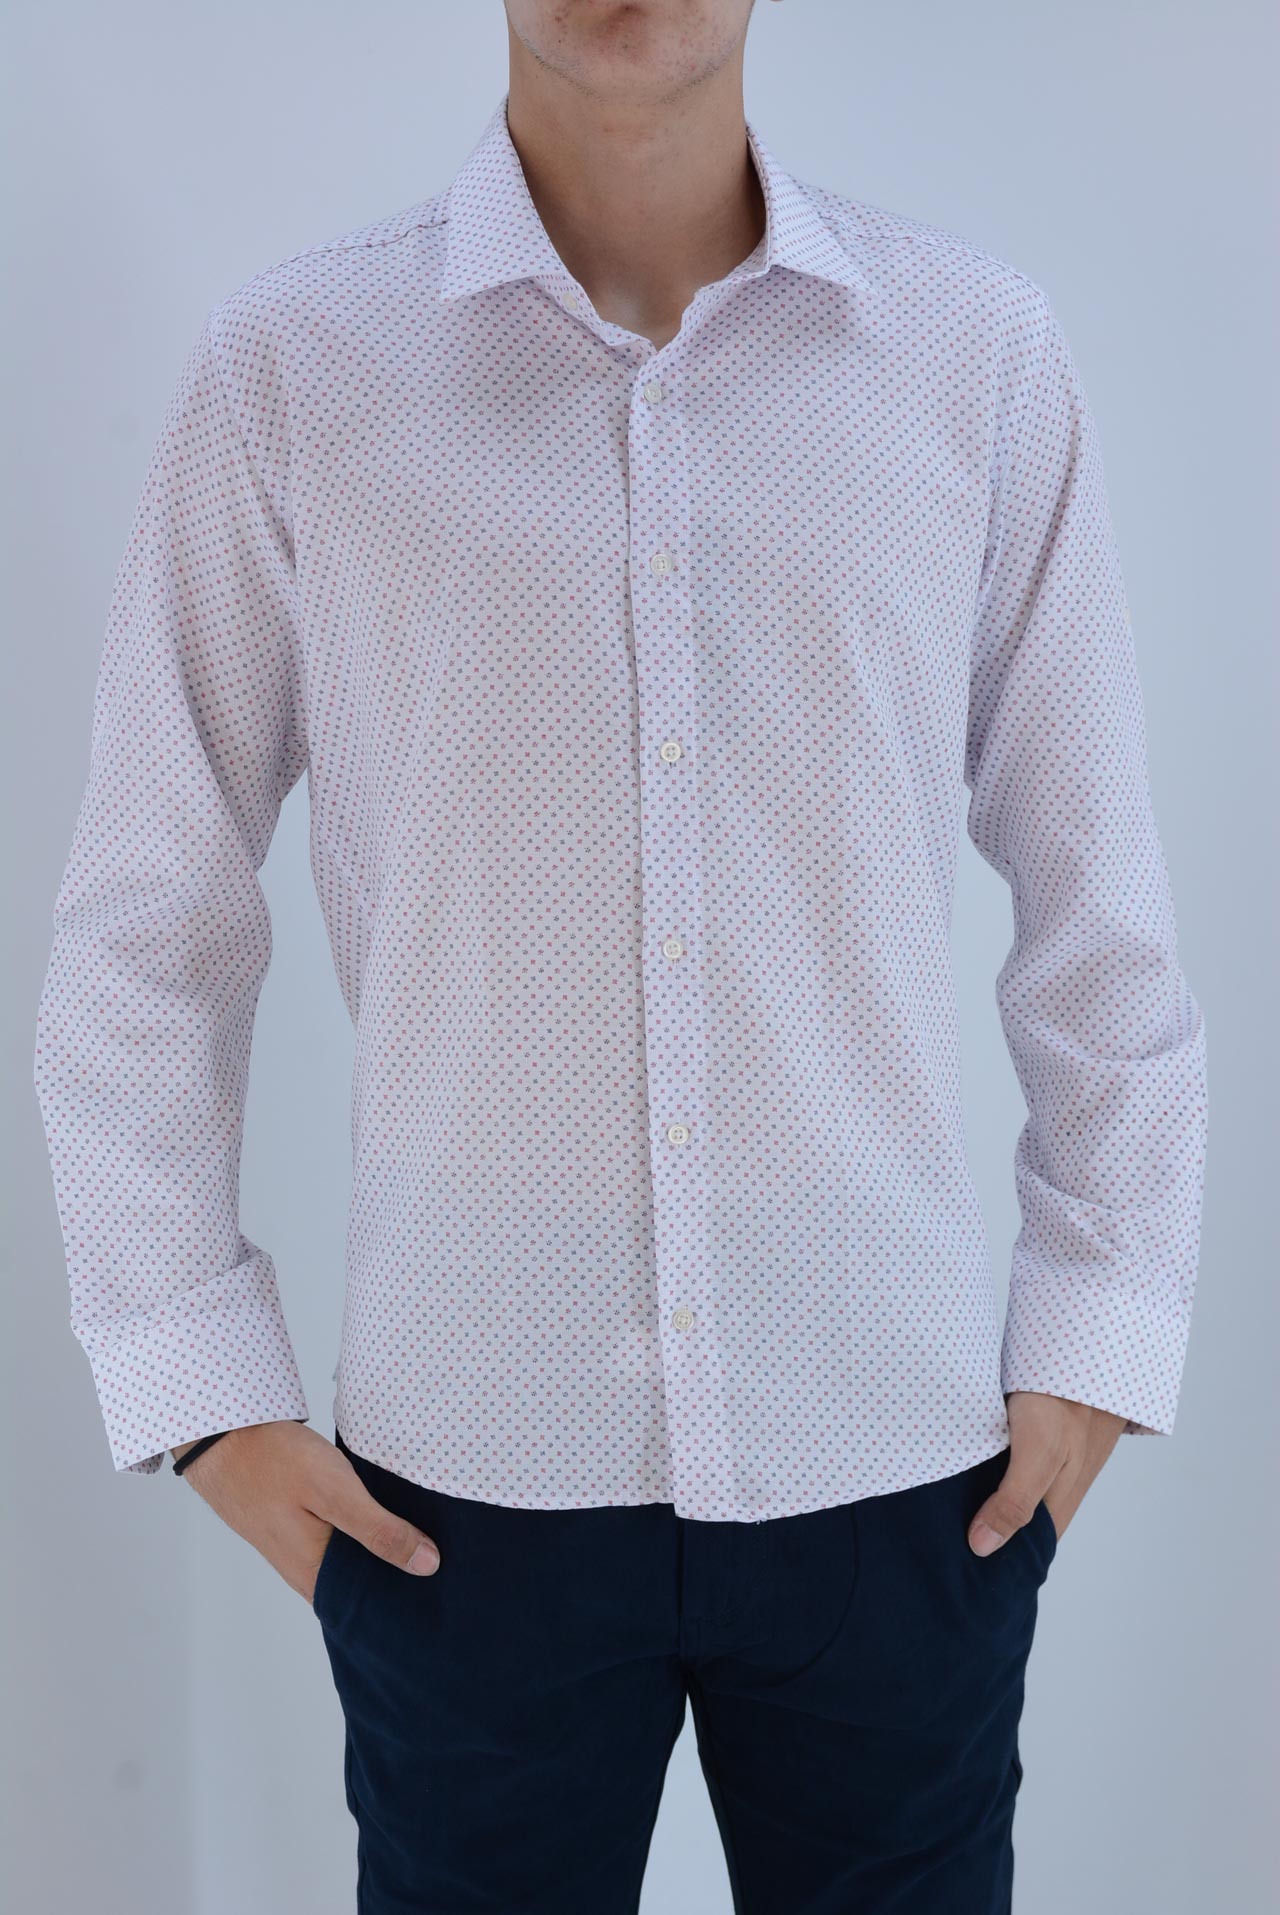 Patterned shirt male code 2111 front side